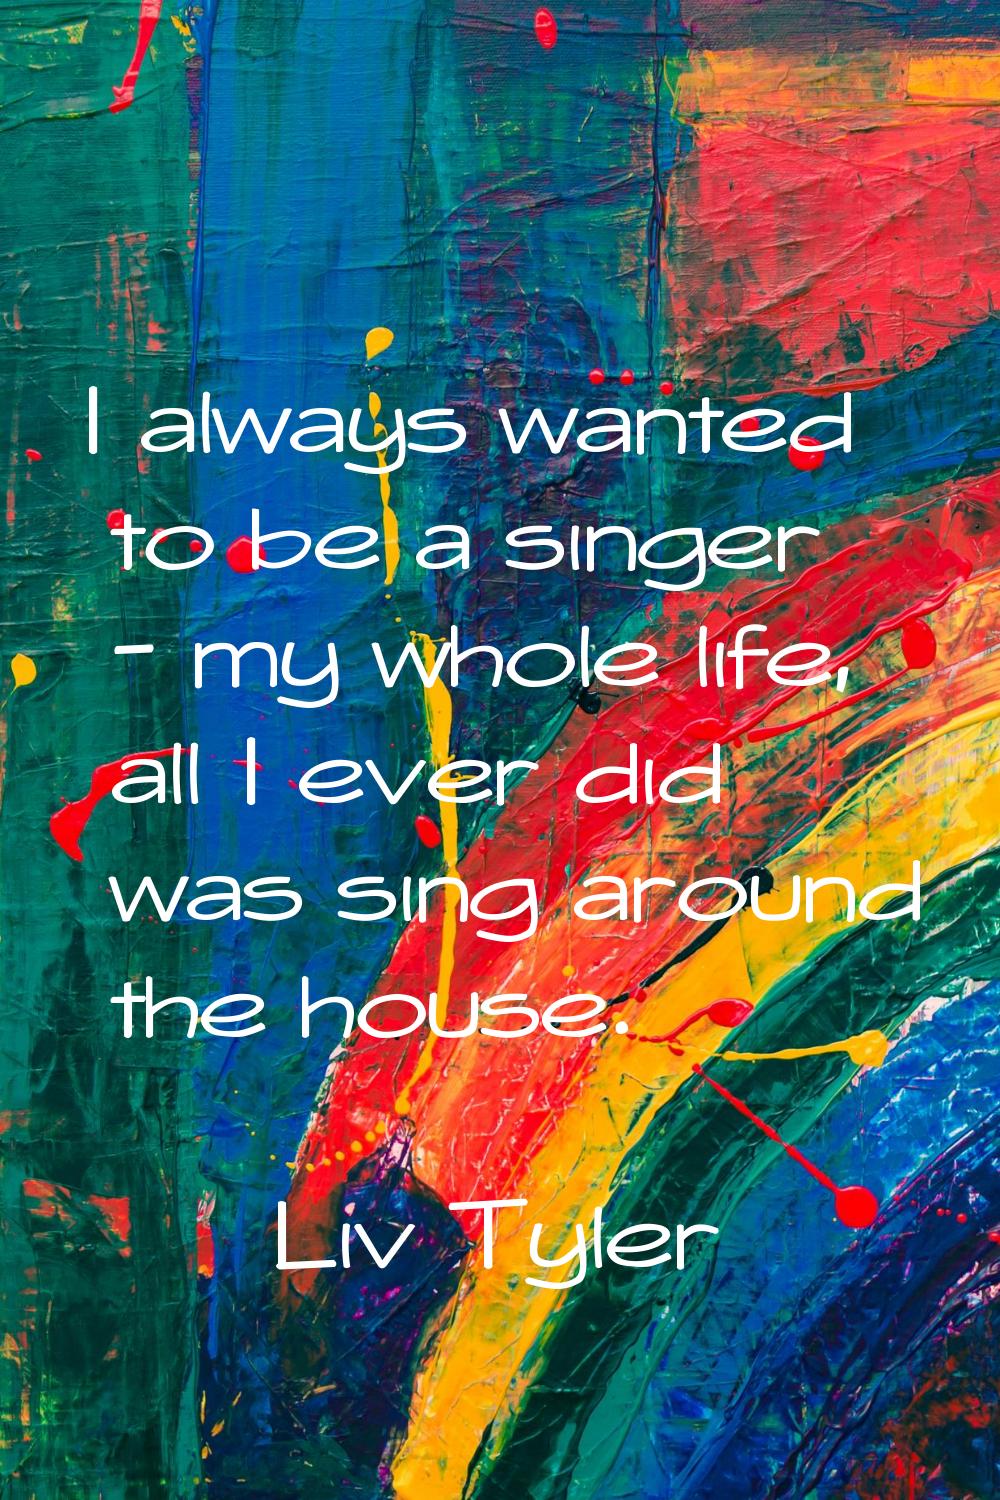 I always wanted to be a singer - my whole life, all I ever did was sing around the house.